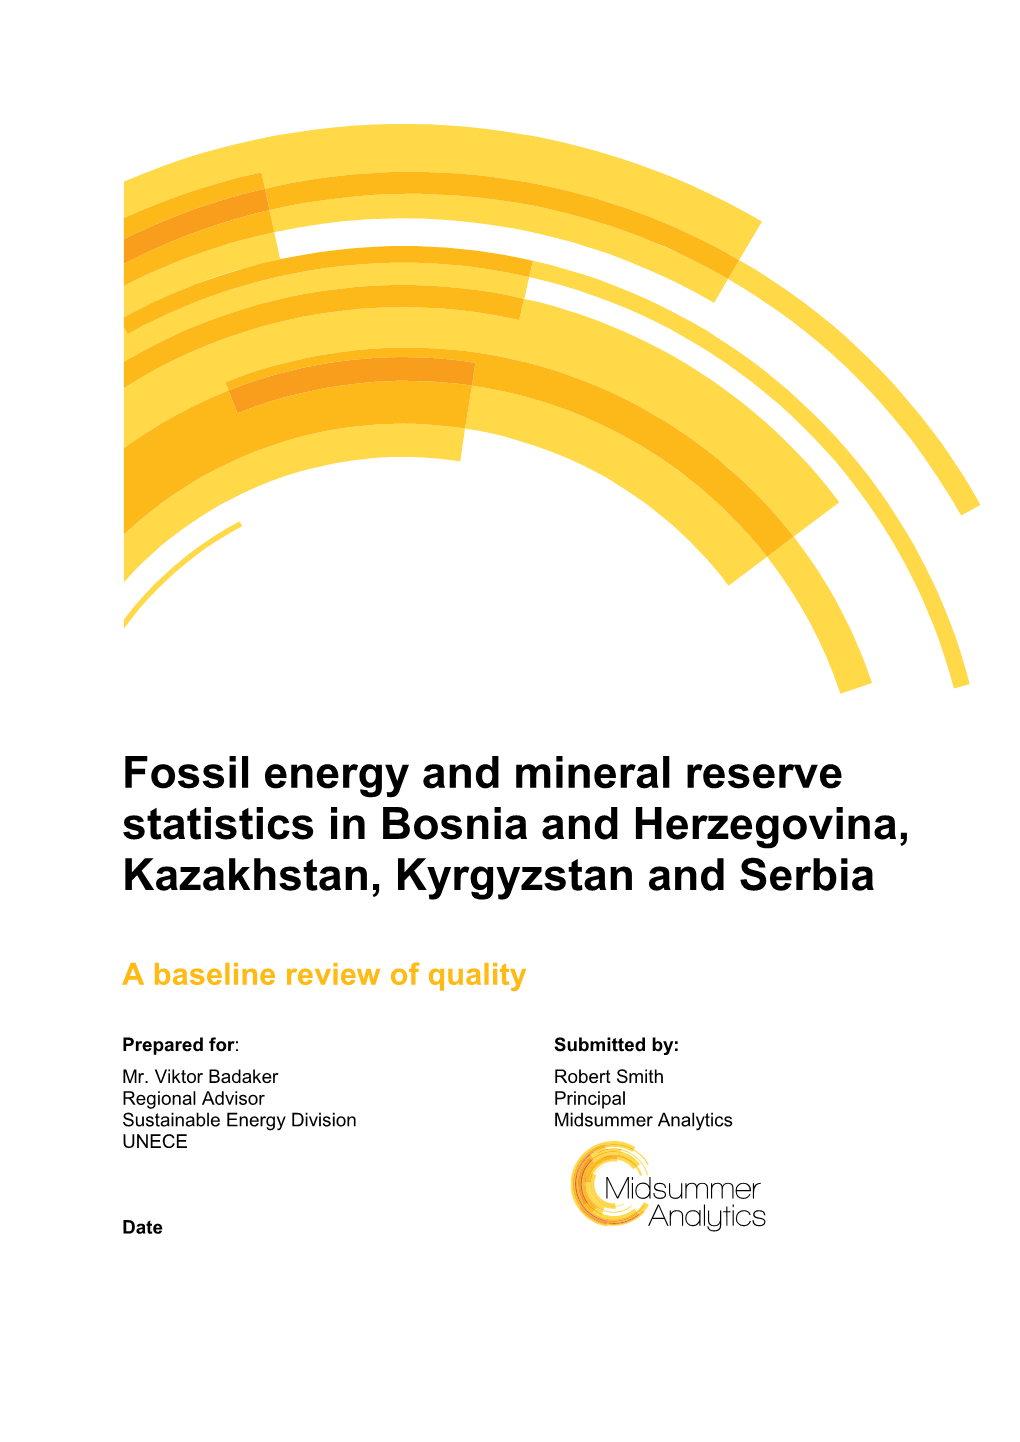 Fossil Energy and Mineral Reserve Statistics in Bosnia and Herzegovina, Kazakhstan, Kyrgyzstan and Serbia